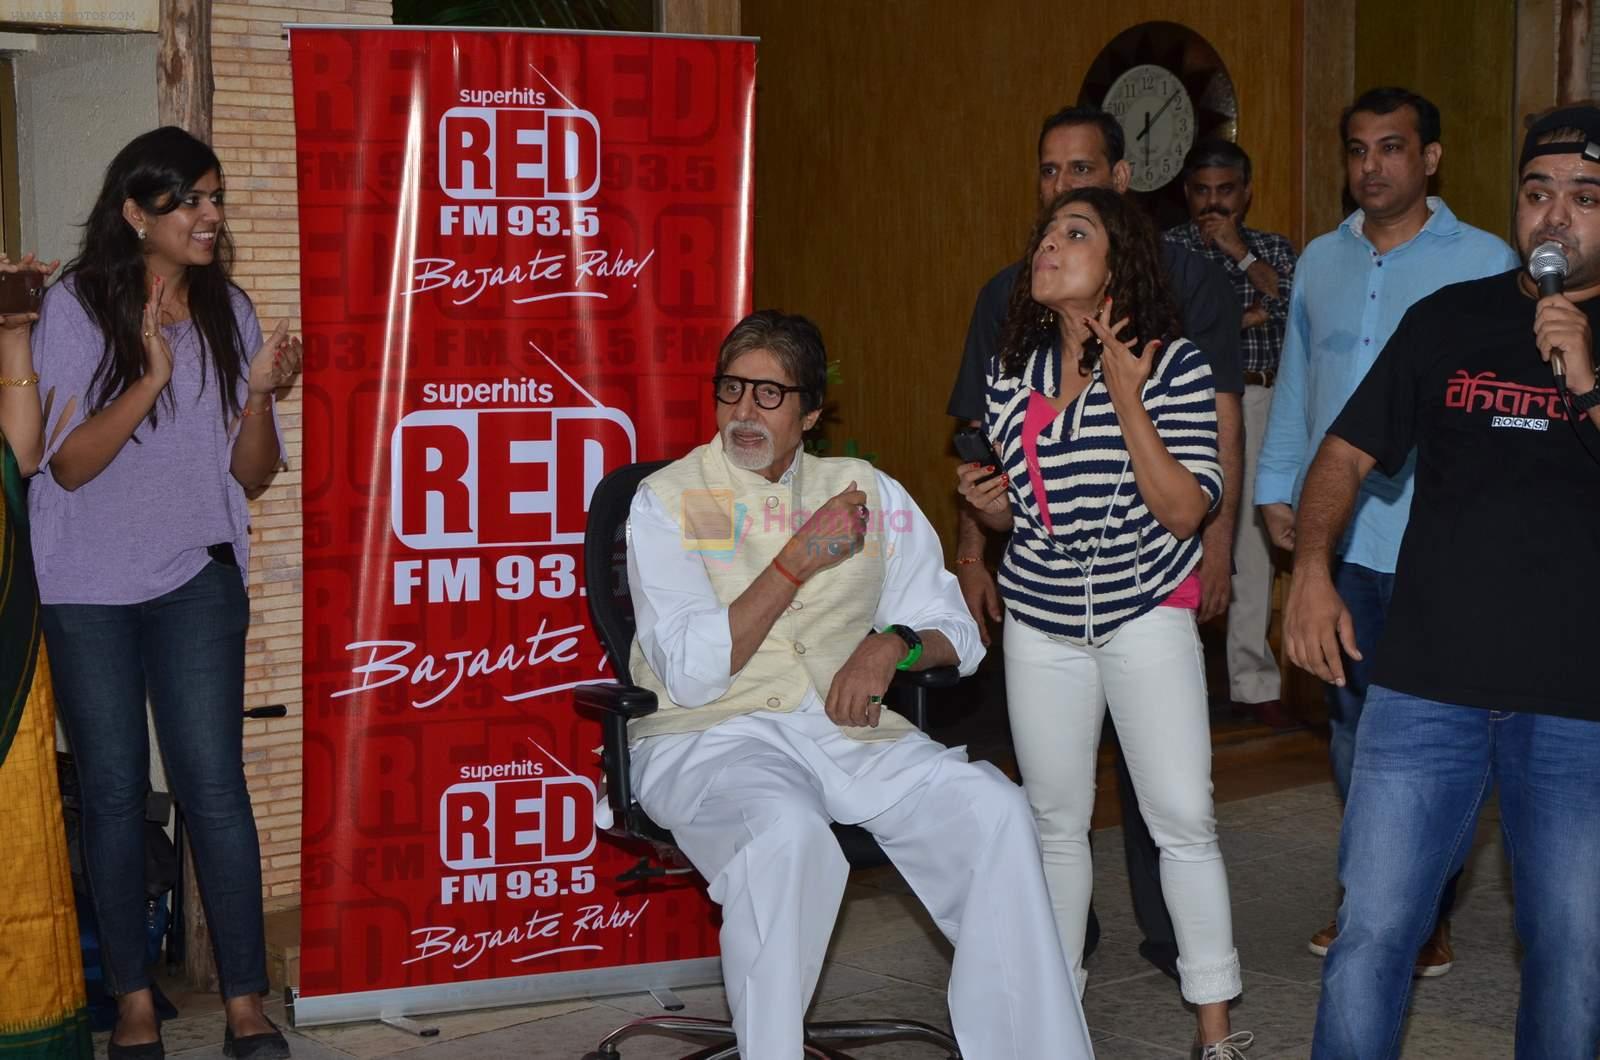 Amitabh bachchan at Dahravi band live performance organised by Red FM in Janak on 31st Aug 2015